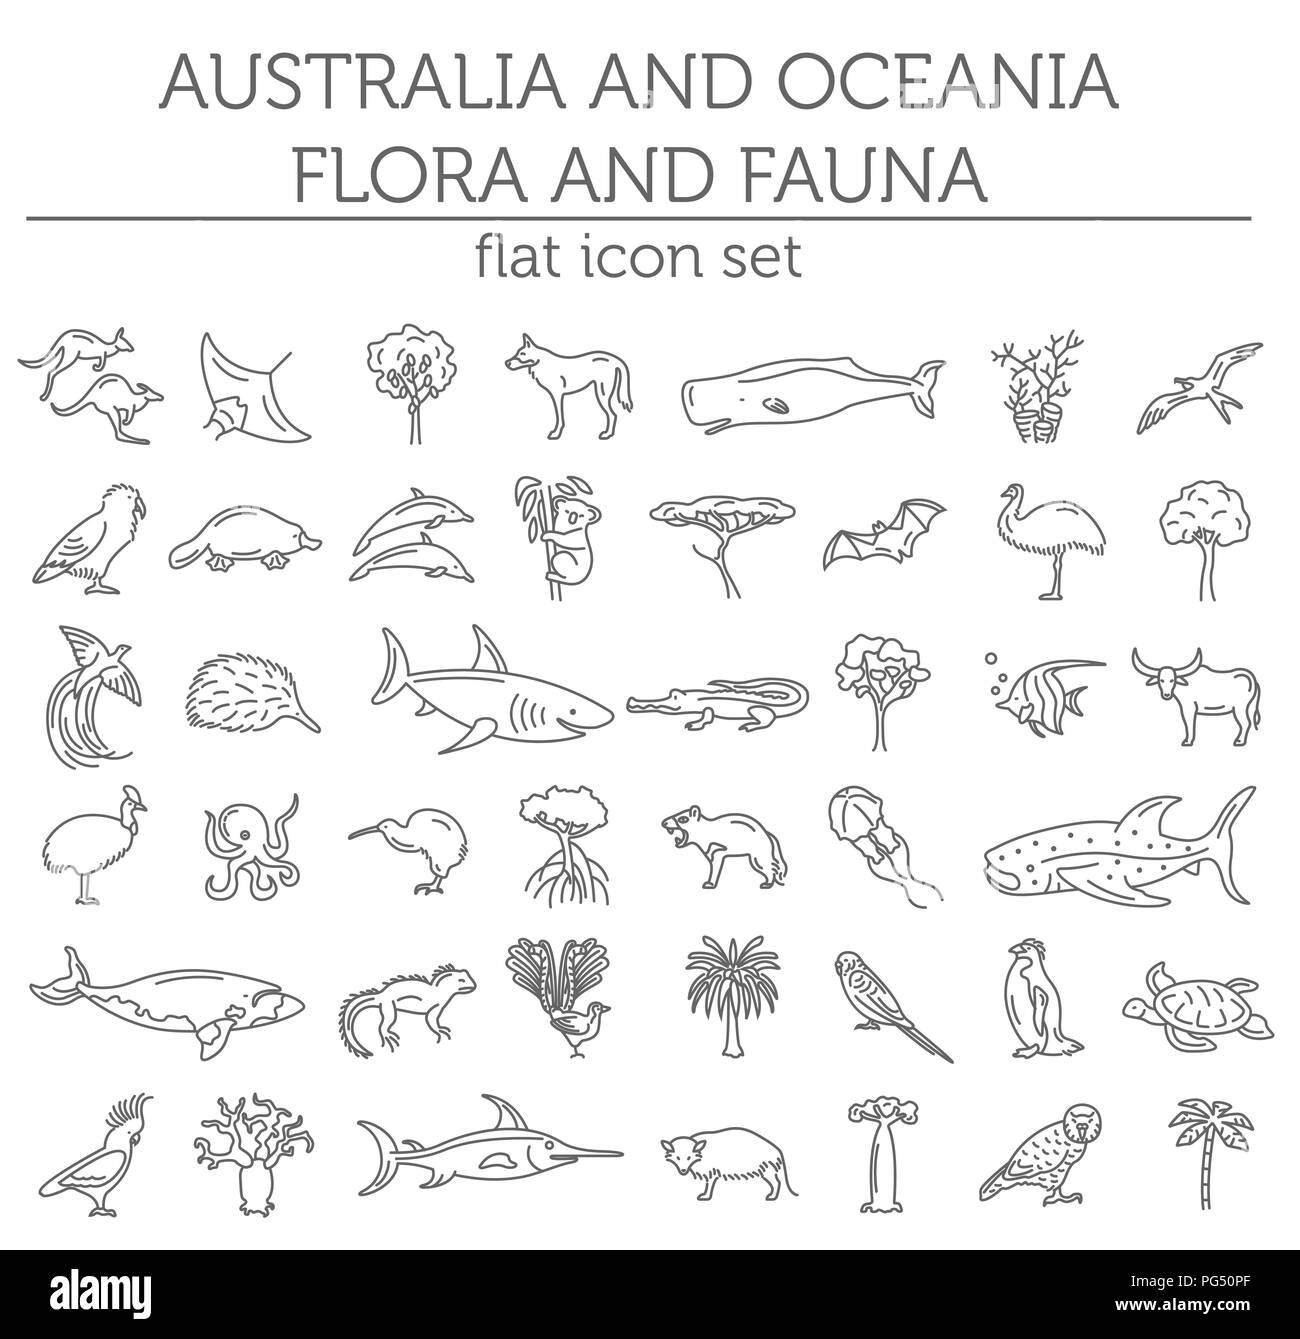 Flat Australia and Oceania flora and fauna  elements. Animals, birds and sea life simple line icon set. Vector illustration Stock Vector